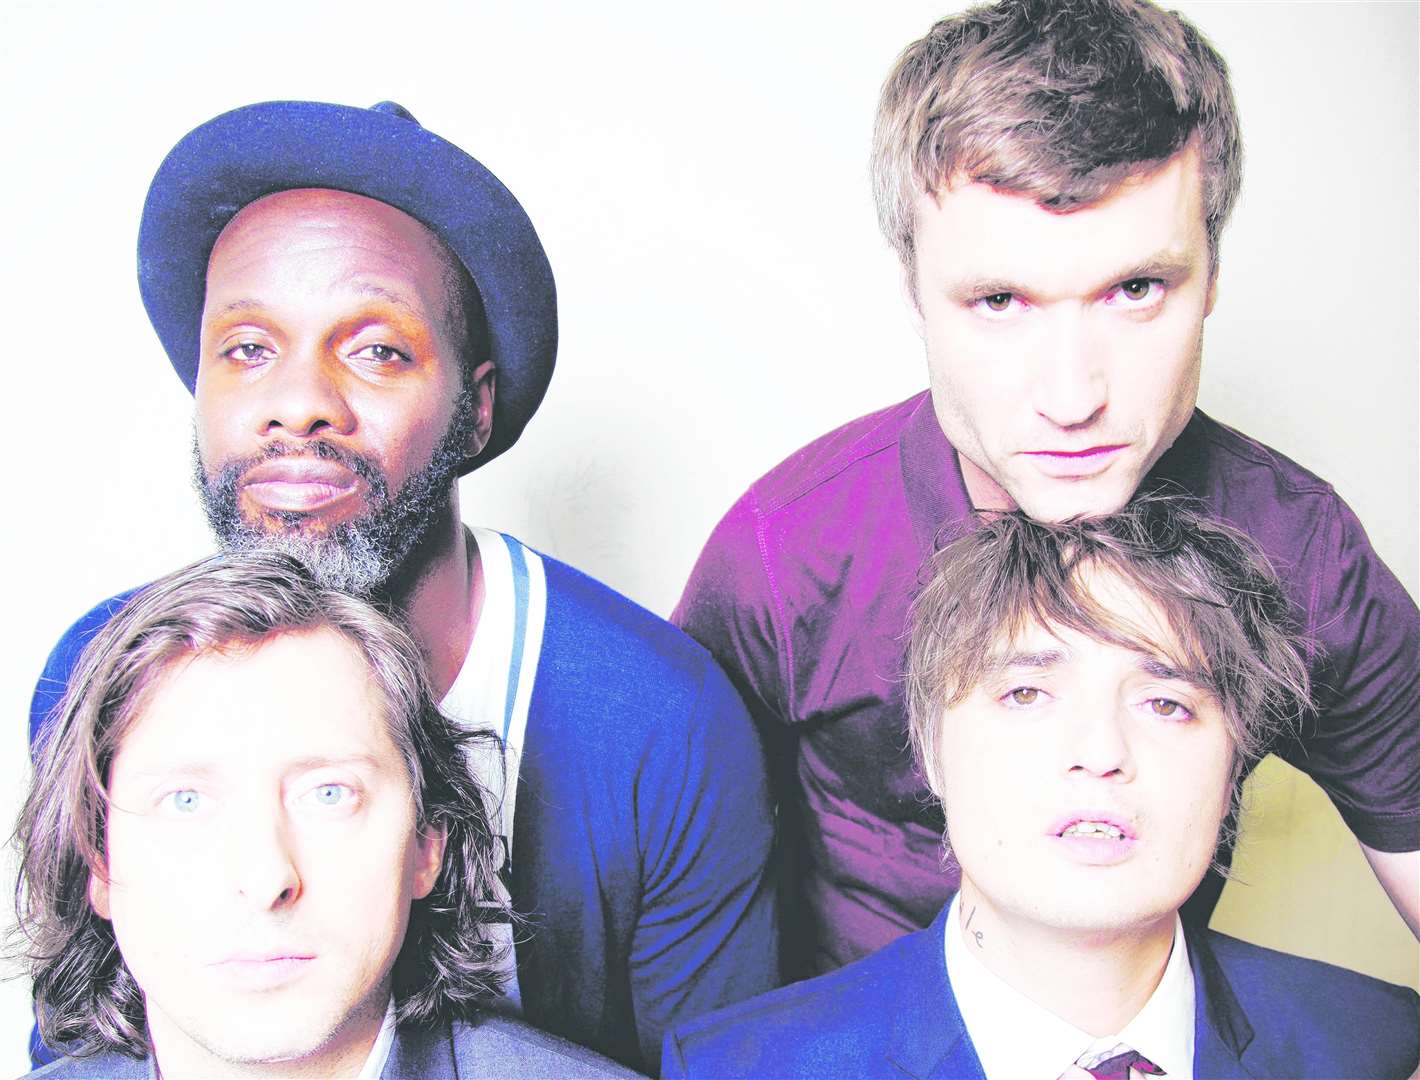 The Libertines are headlining Wheels & Fins Festival this summer